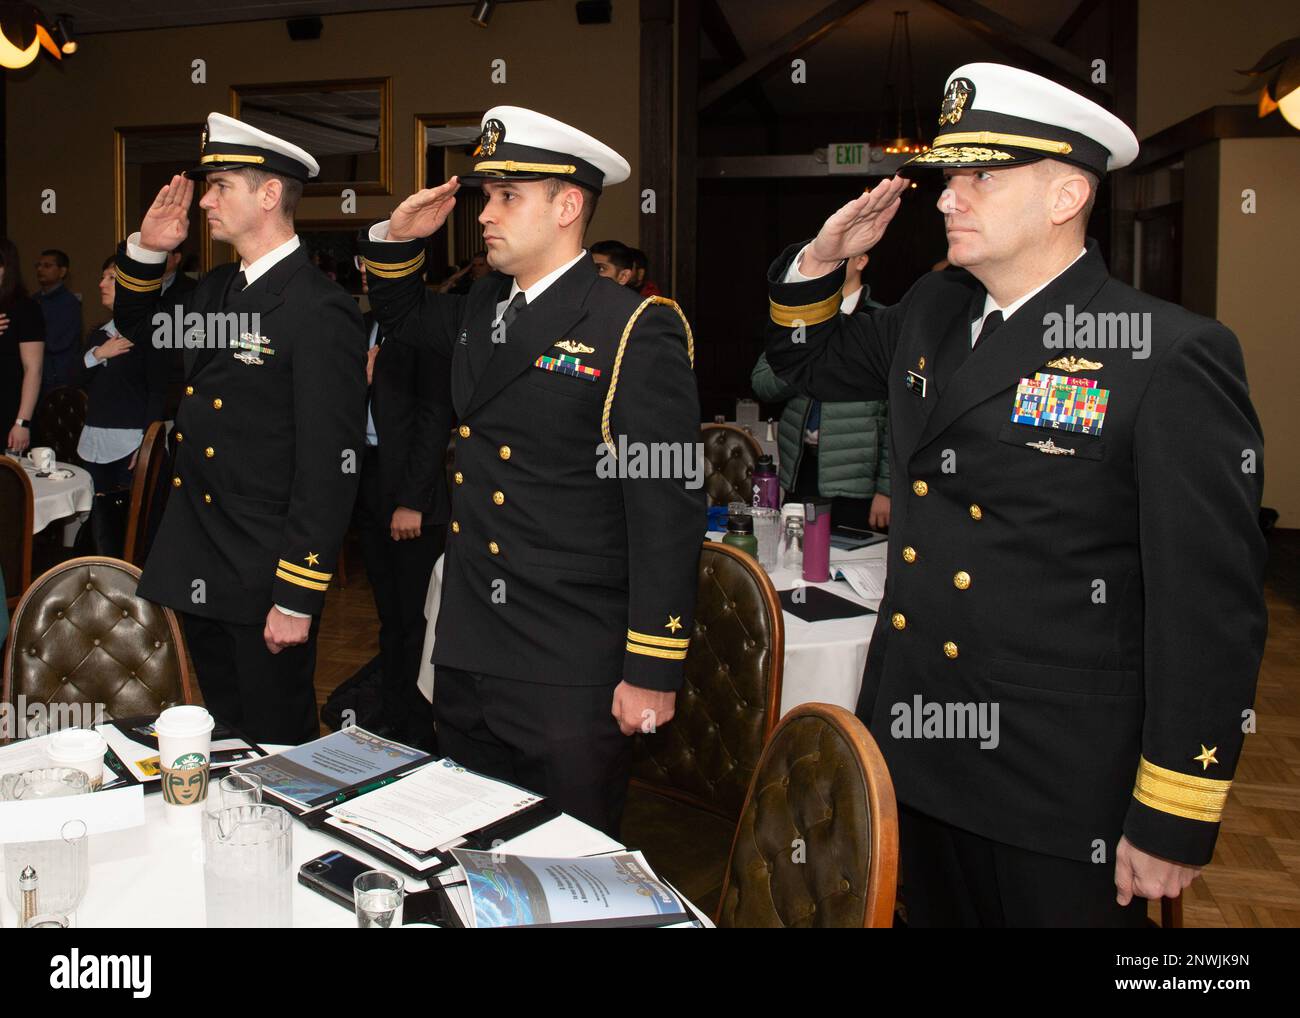 230218-N-ED185-1010  BREMERTON, Wash. (Feb. 18, 2023) Rear Adm. Mark Behning, commander, Submarine Group 9, right, Lt. Christian White, the Submarine Group 9 flag aide, and Lt. Corey T. Jones, the Submarine Group 9 public affairs officer, salute during the parading of the colors during the Junior Science and Humanities Symposium (JSHS) in Bremerton, Washington, February 18, 2023. The JSHS is a Department of Defense sponsored science, technology, engineering and mathematics (STEM) program that encourages high school students to conduct original research in the fields of STEM. Stock Photo